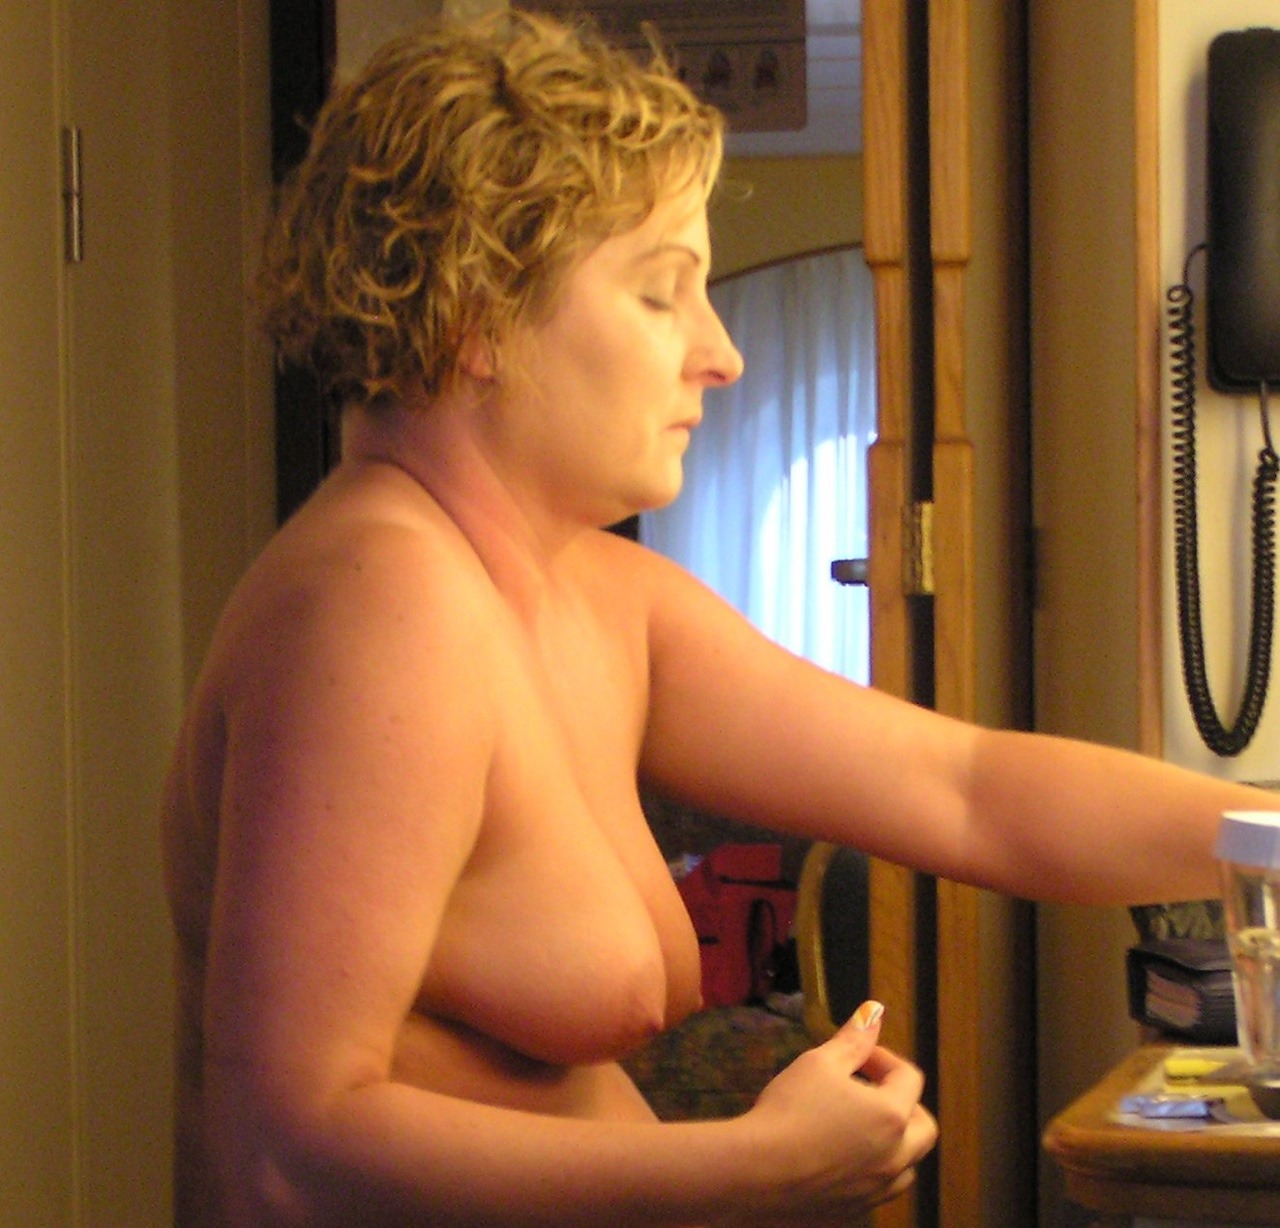 Anonymous nude cruise wife submission part 3 of 3!!! Thank you so much for your submissions!!!